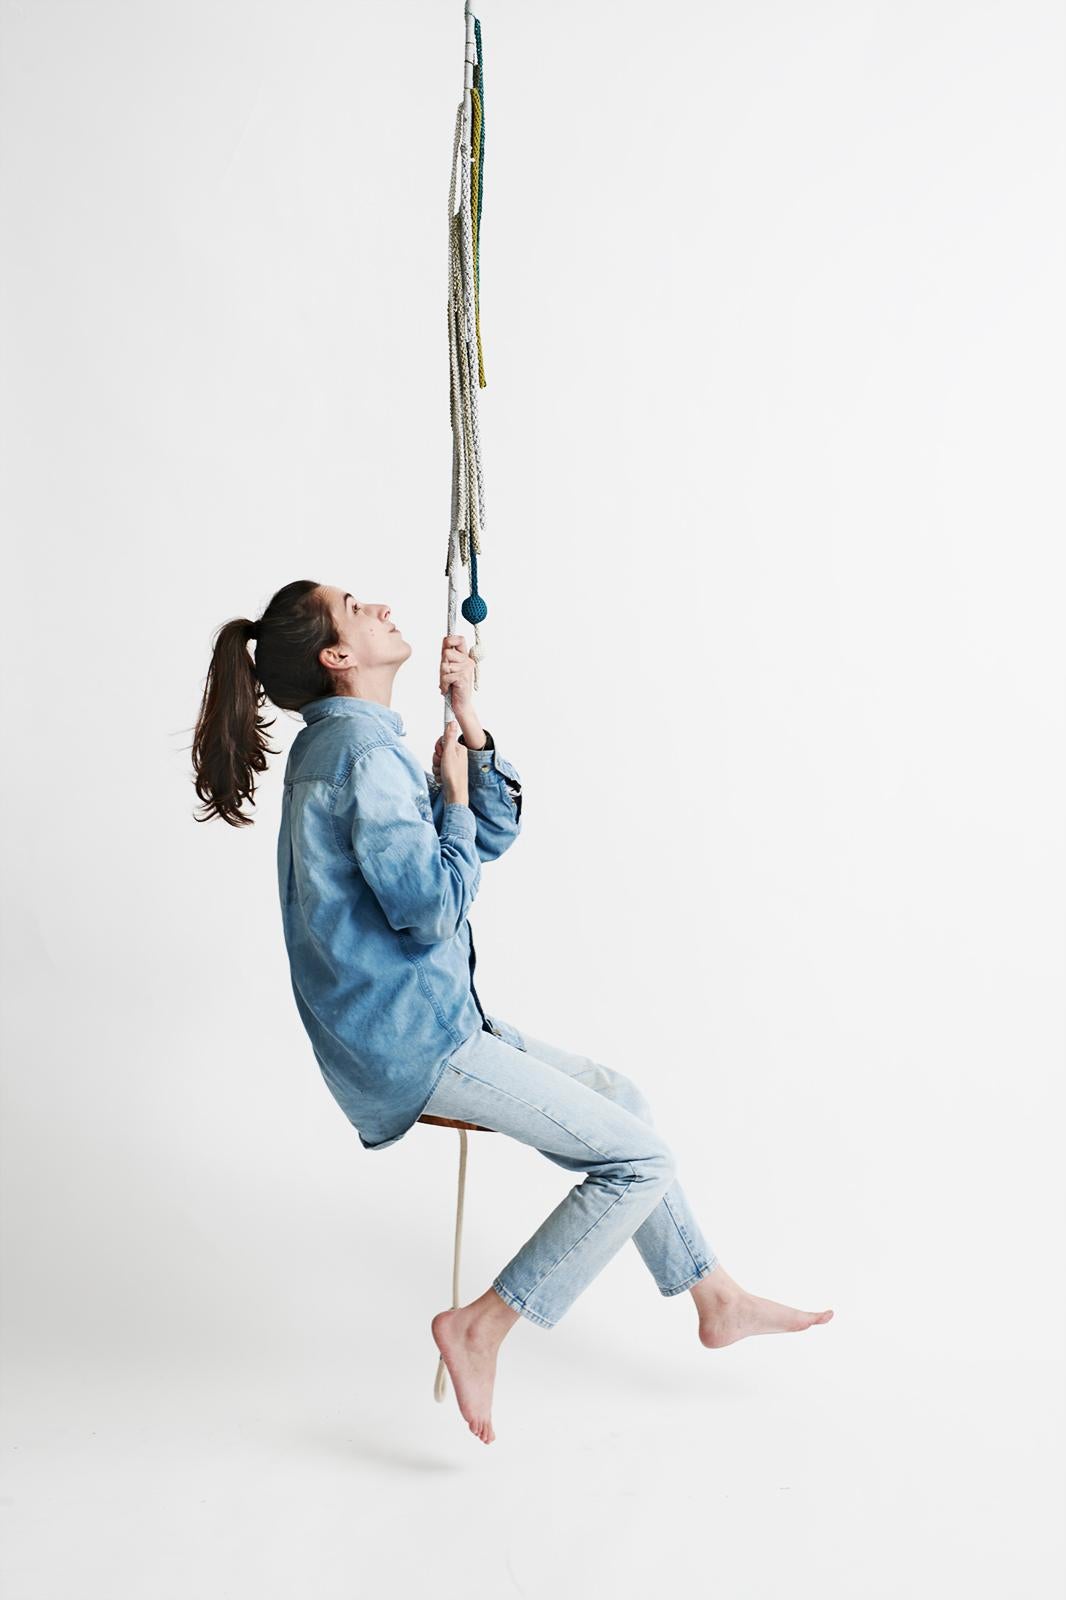 Let your little ones enjoy swinging on the IOTA Tarzan swing. Soaring through the air is super fun, makes you laugh and develops motor skills and balance. This stylish swing inspired by hanging vines will work great in kids' rooms, play areas or the